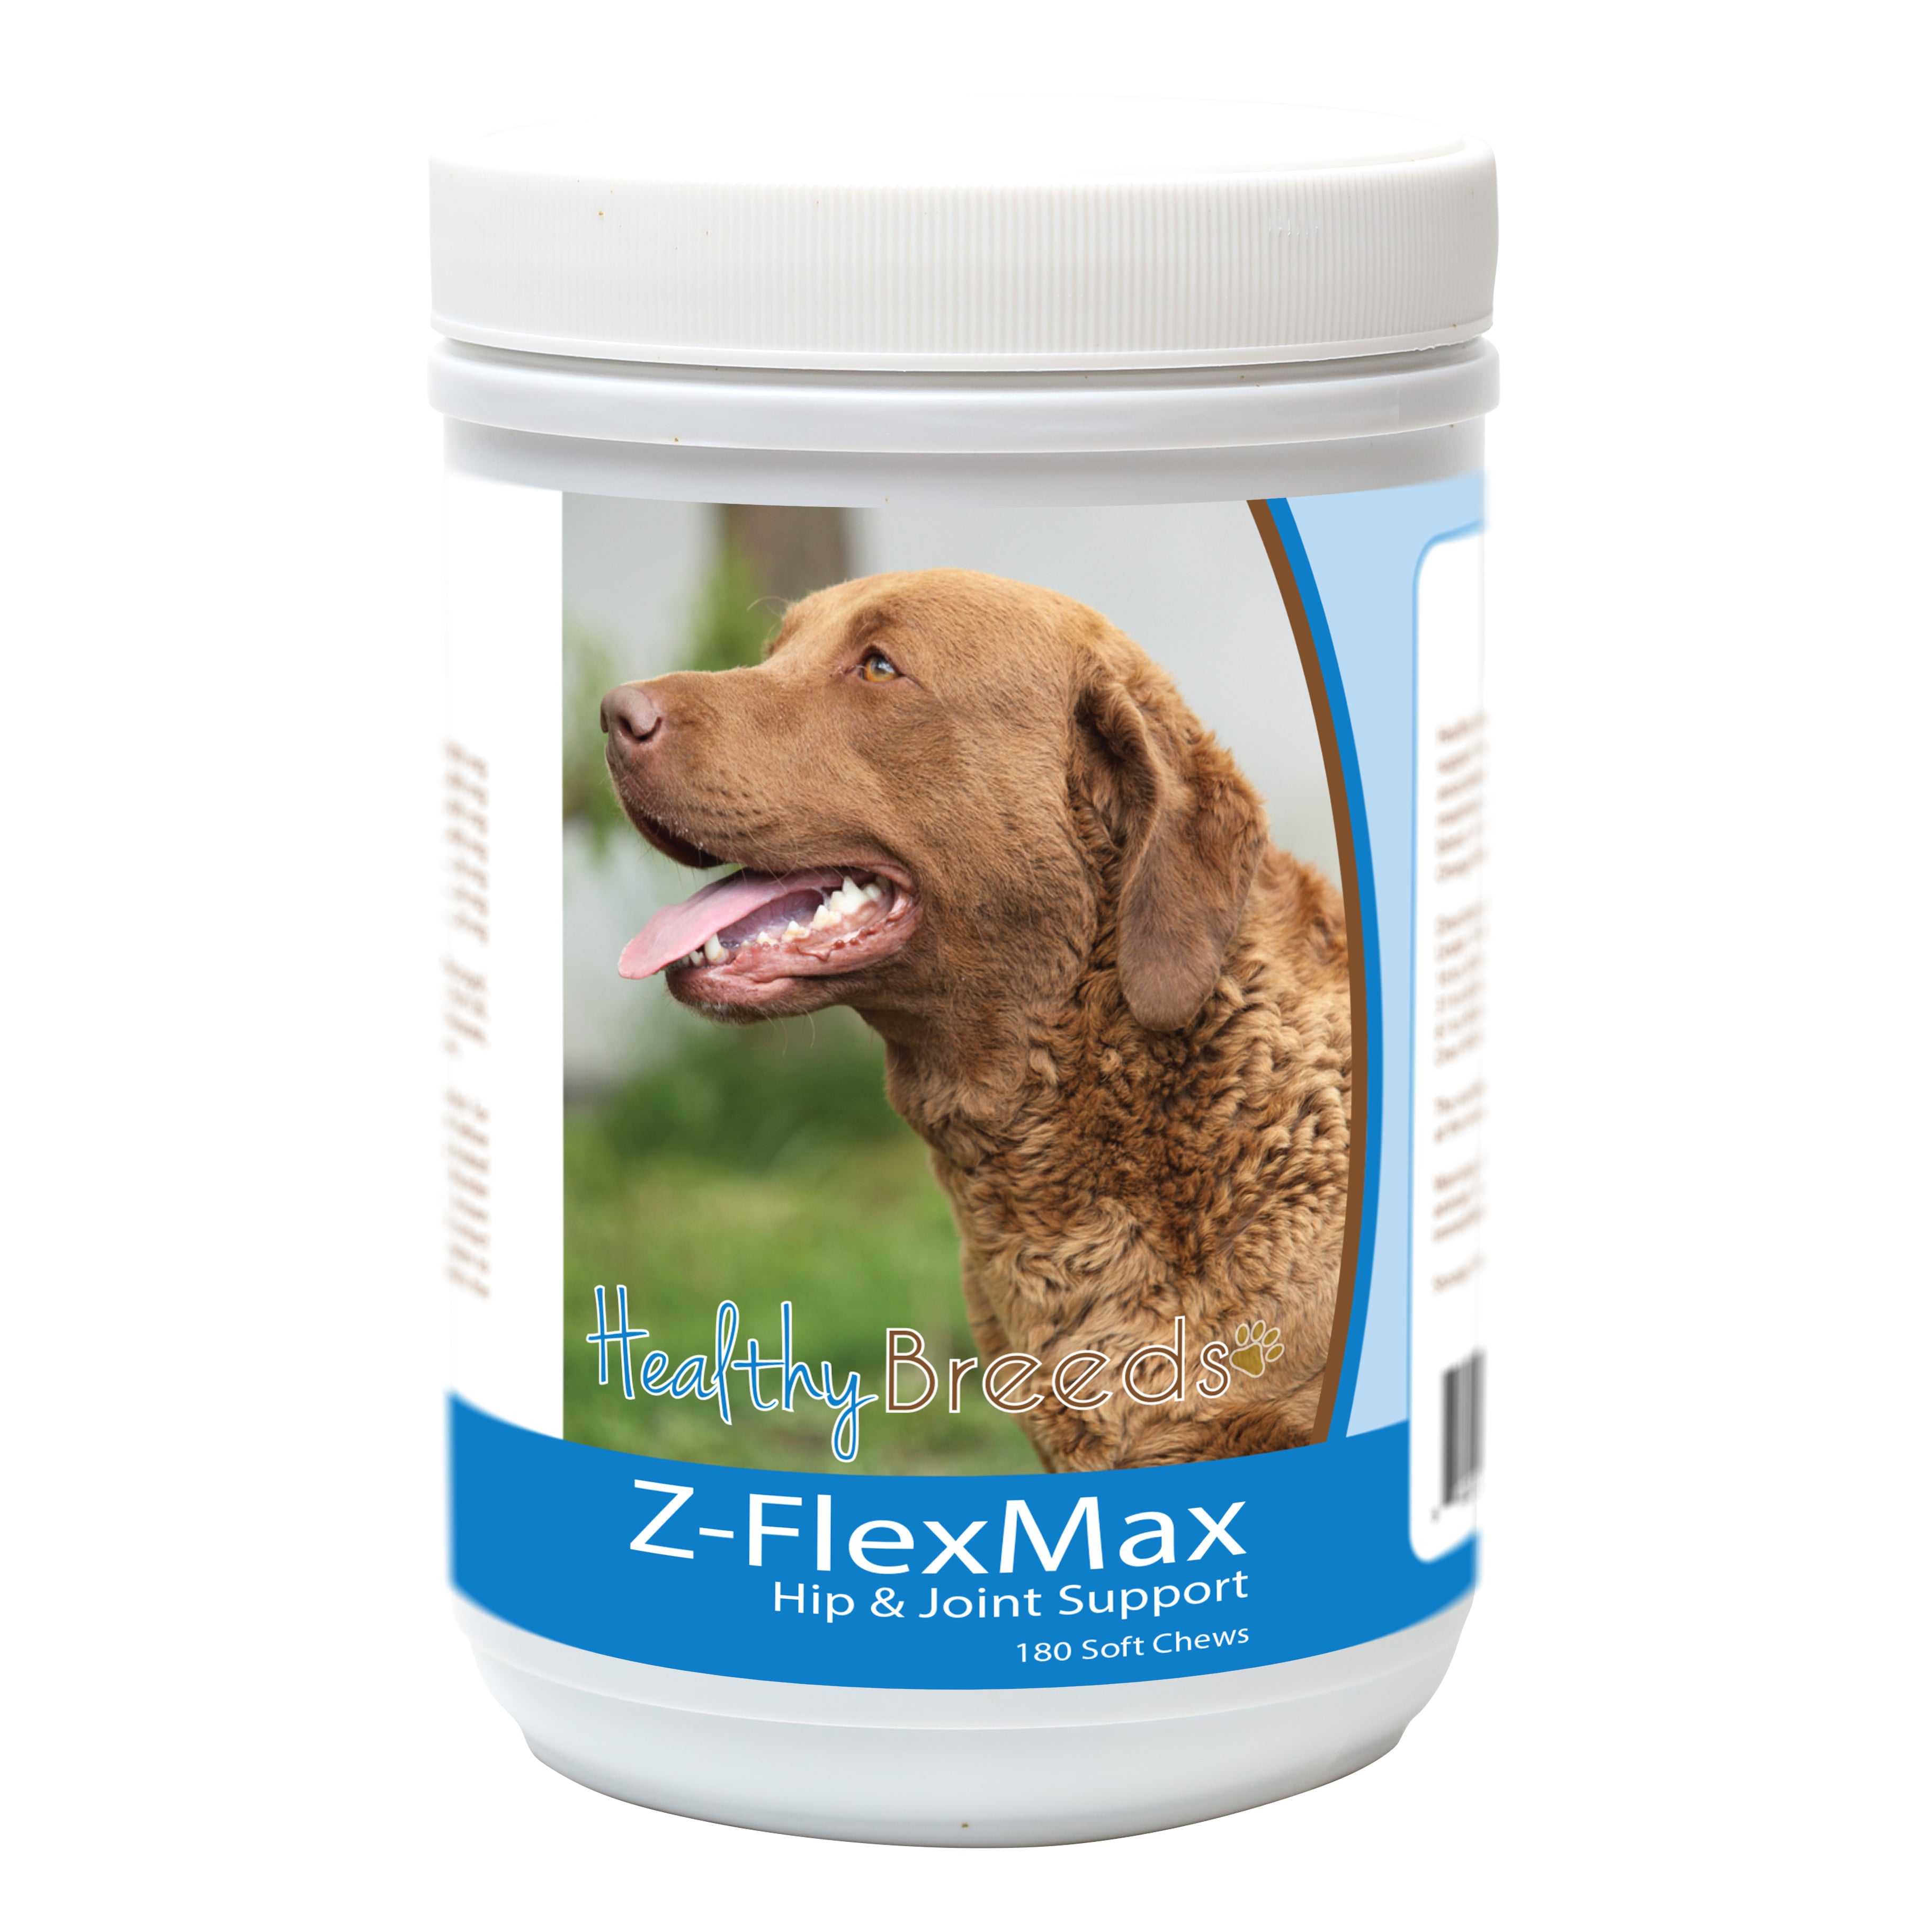 Chesapeake Bay Retriever Z-Flex Max Dog Hip and Joint Support 180 Count